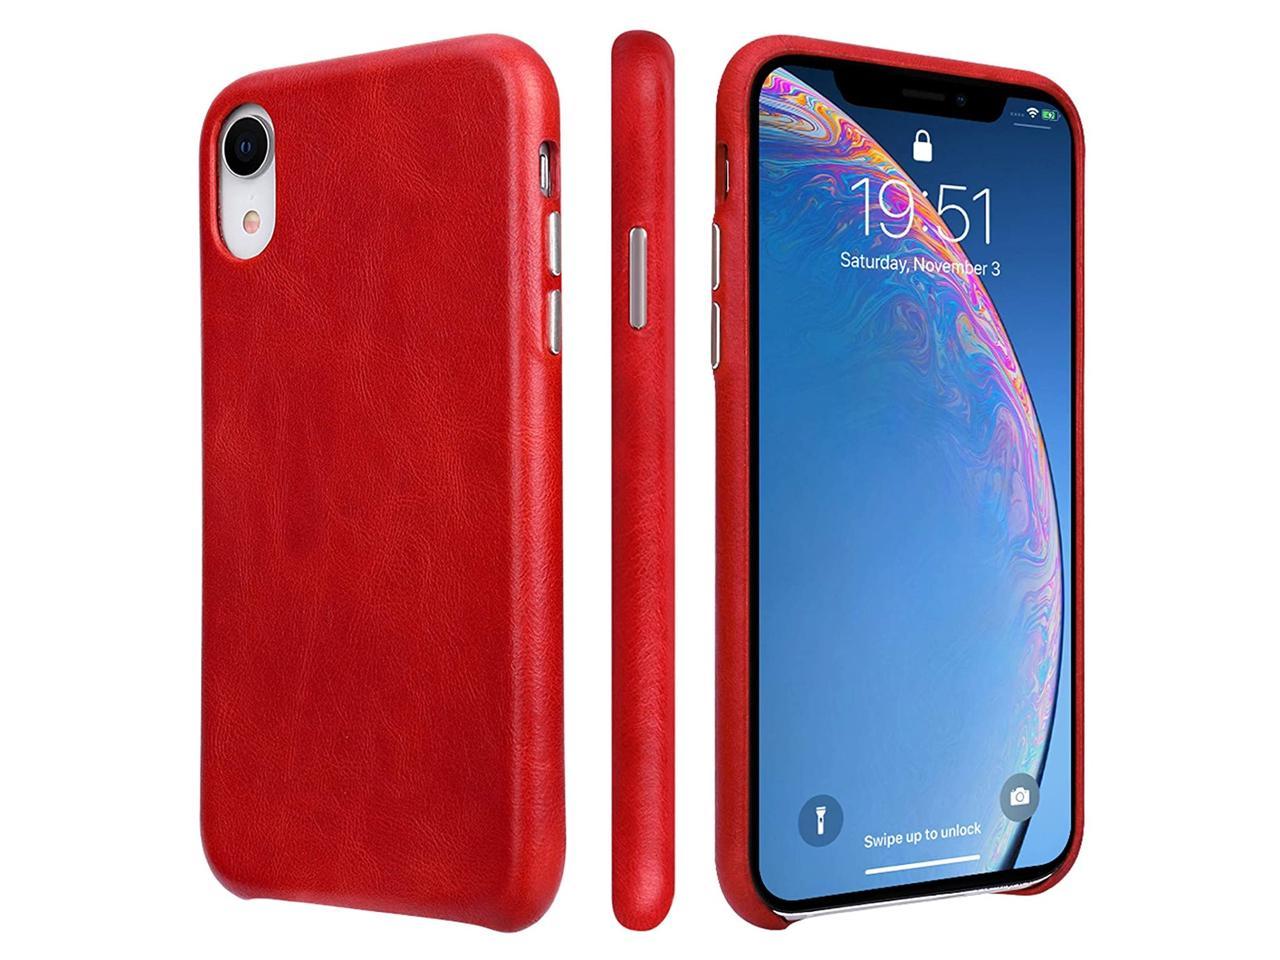 TOOVREN iPhone Xr Case Leather Genuine iPhone XR Leather Case Ultra Slim  Protective Shock-Resistant Vintage Shell Hard Back Cover for Apple iPhone  Xr 